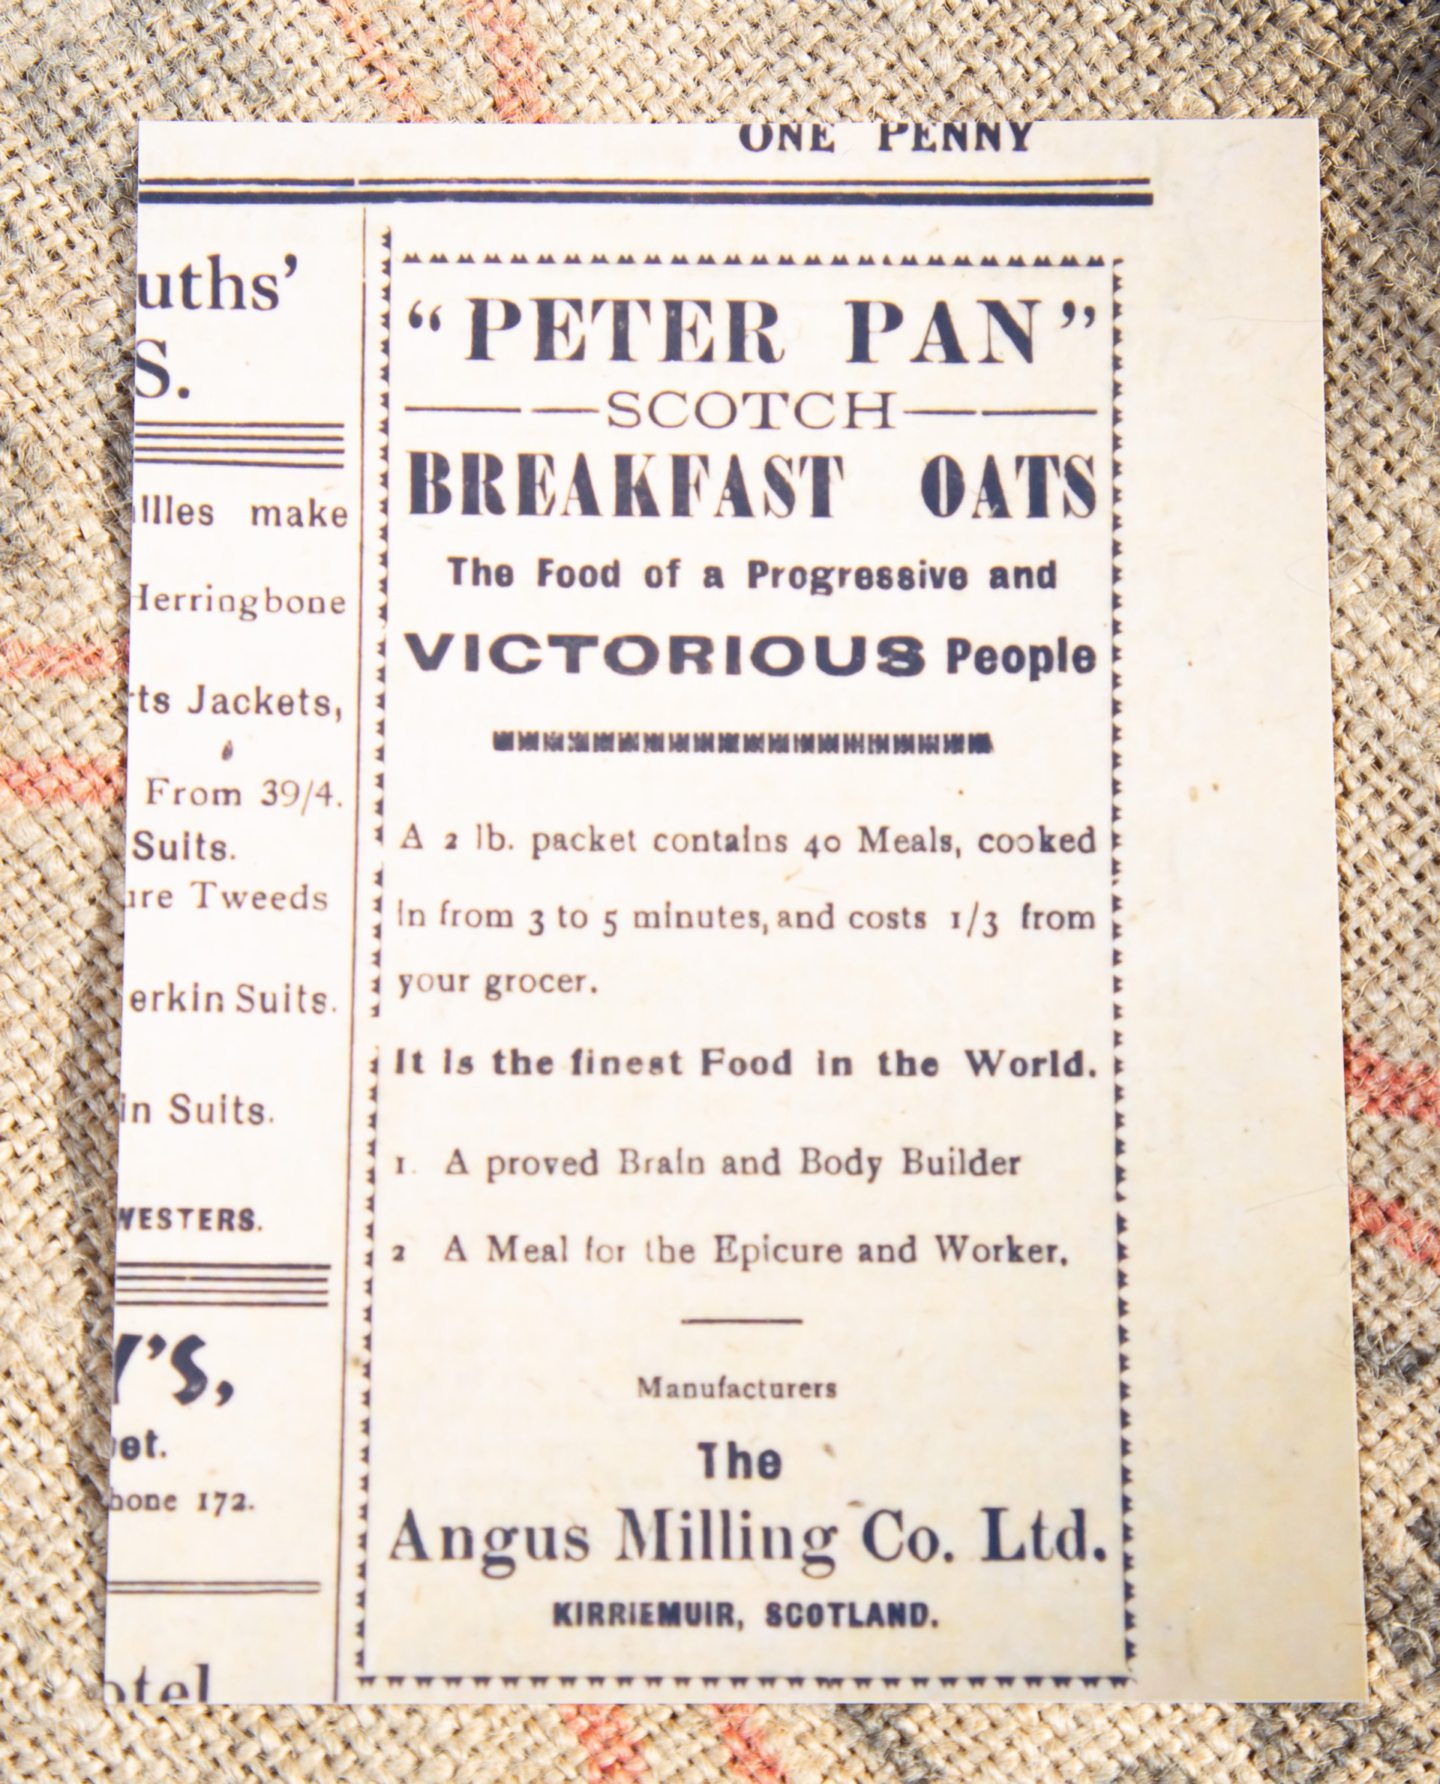 Newspaper ad for the oats